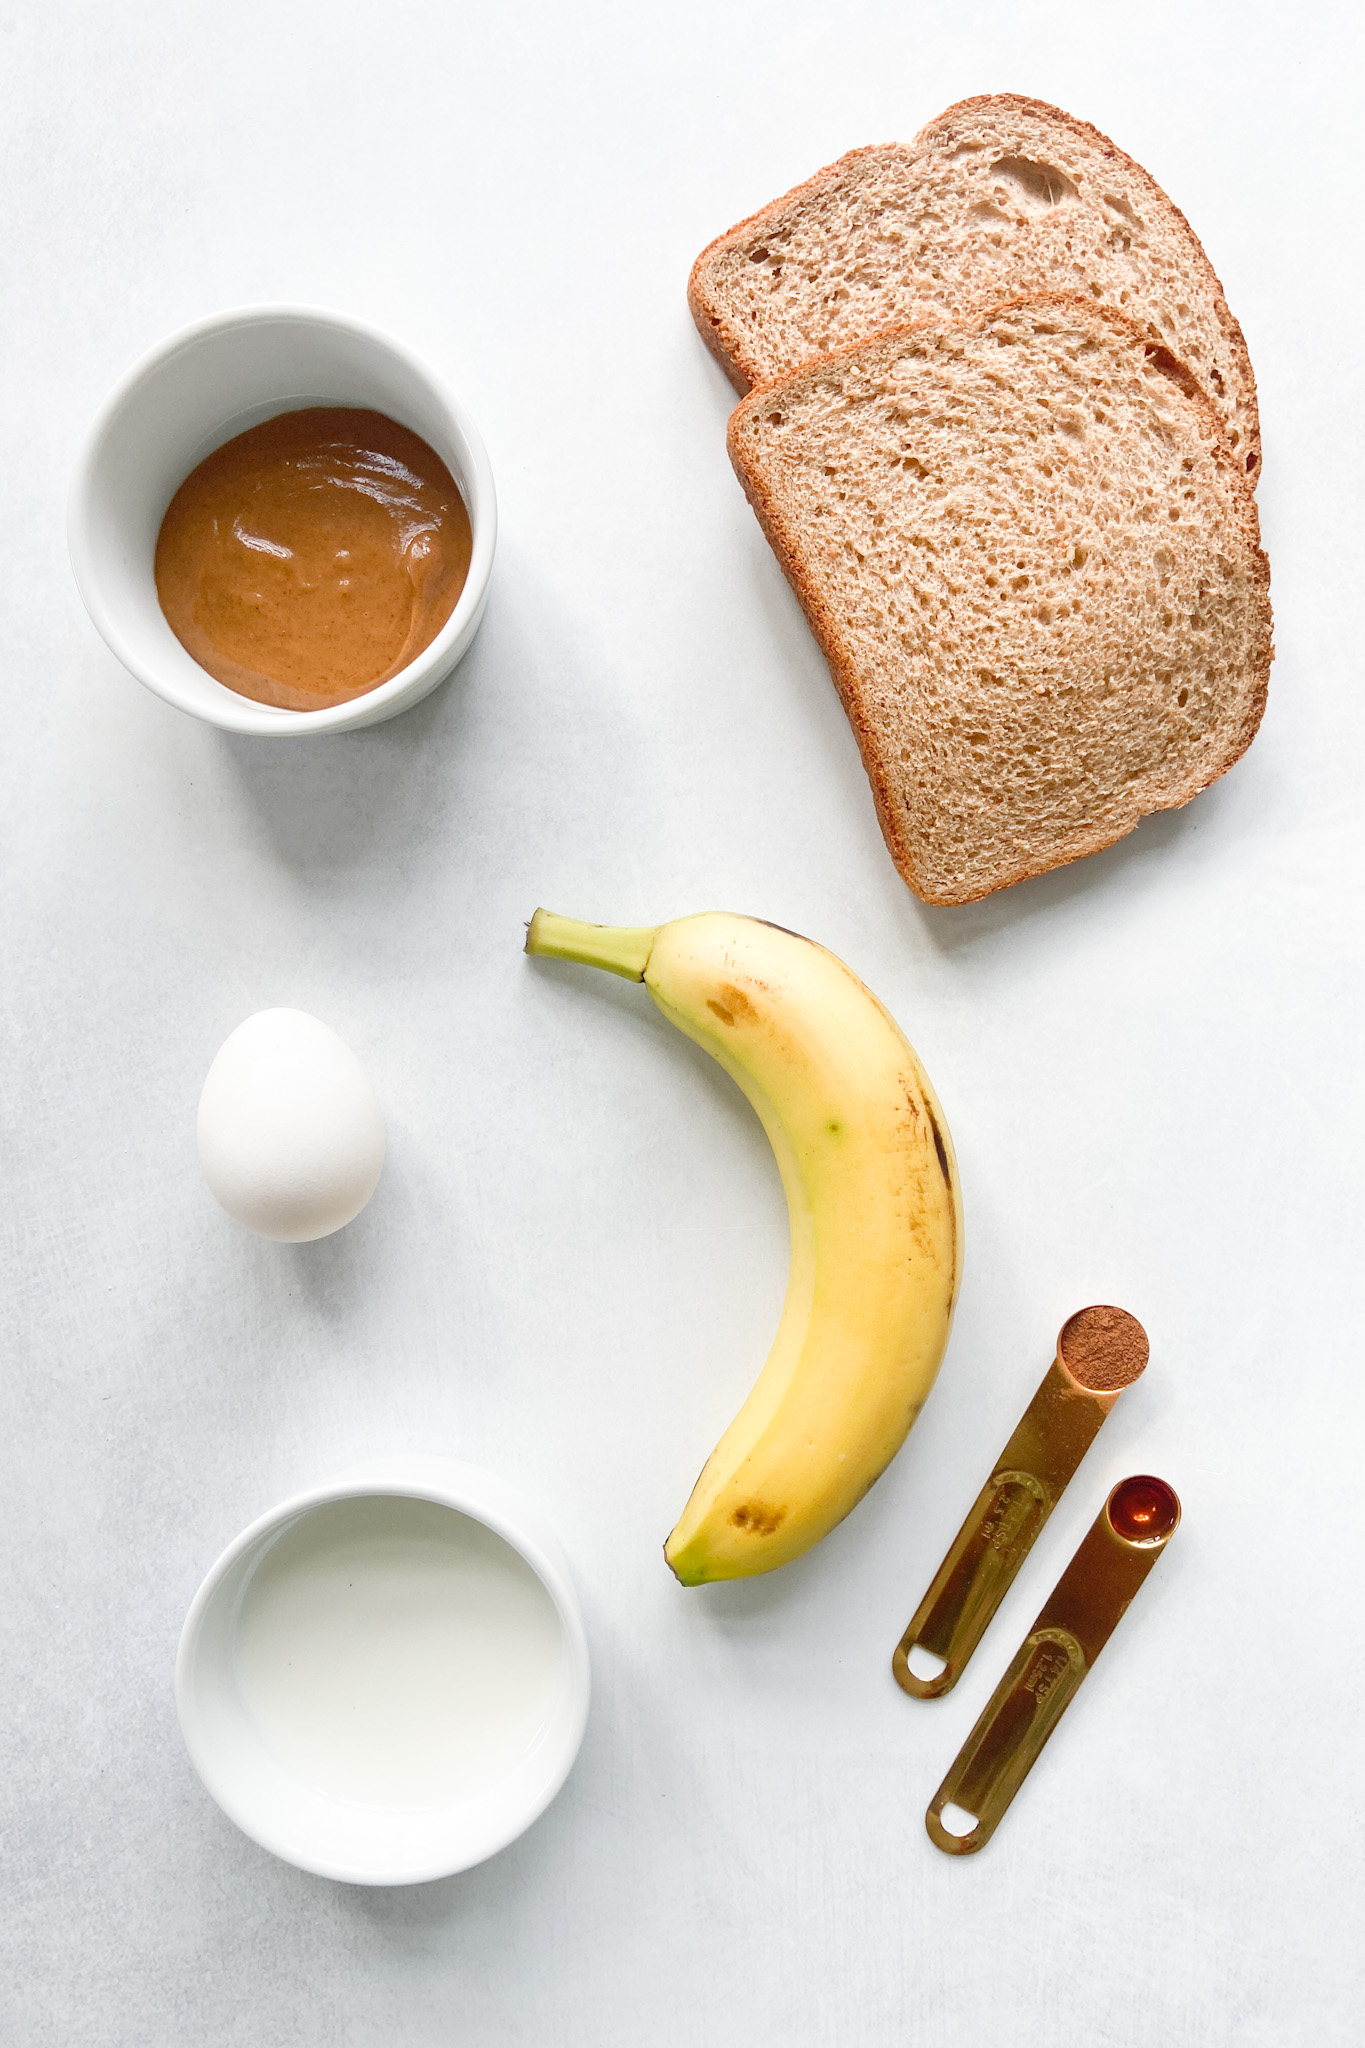 Ingredients to make peanut butter and banana French toast rollups. See recipe card for detailed ingredient quantities.